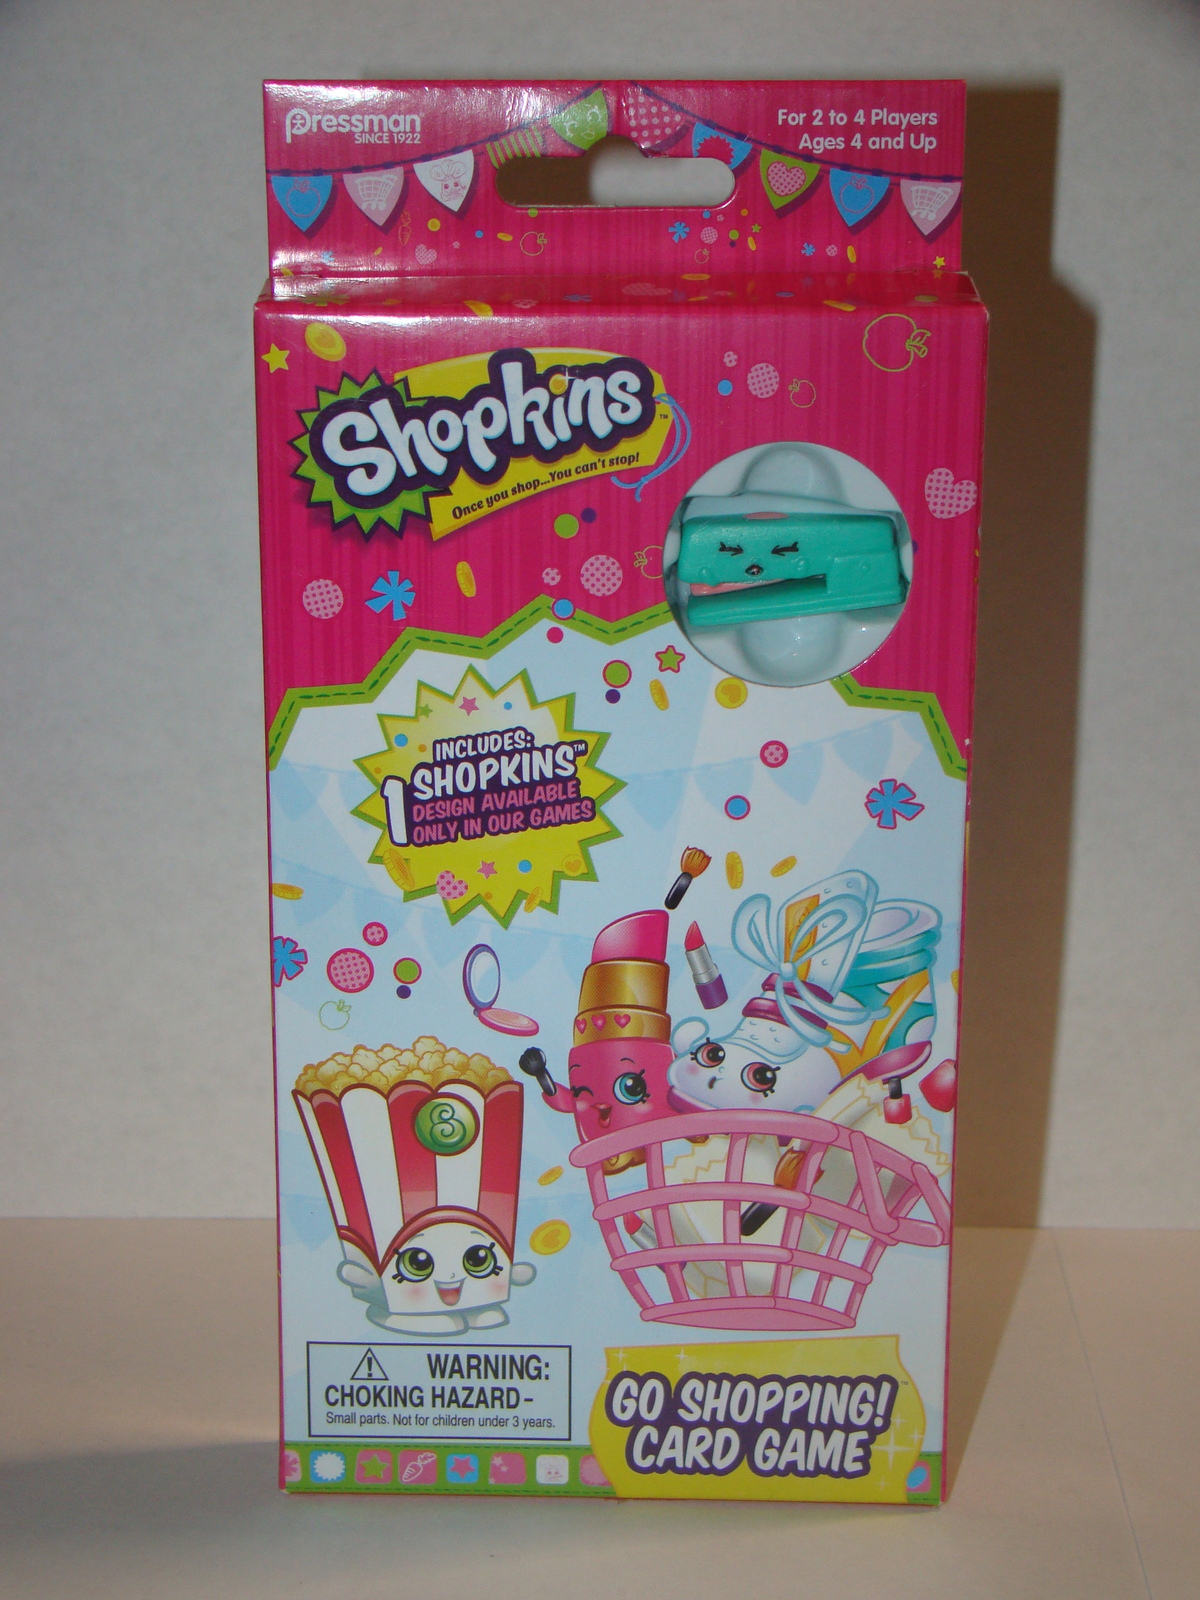 Primary image for Shopkins - GO SHOPPING! CARD GAME - includes 1 Exclusive Shopkins (Stapler)